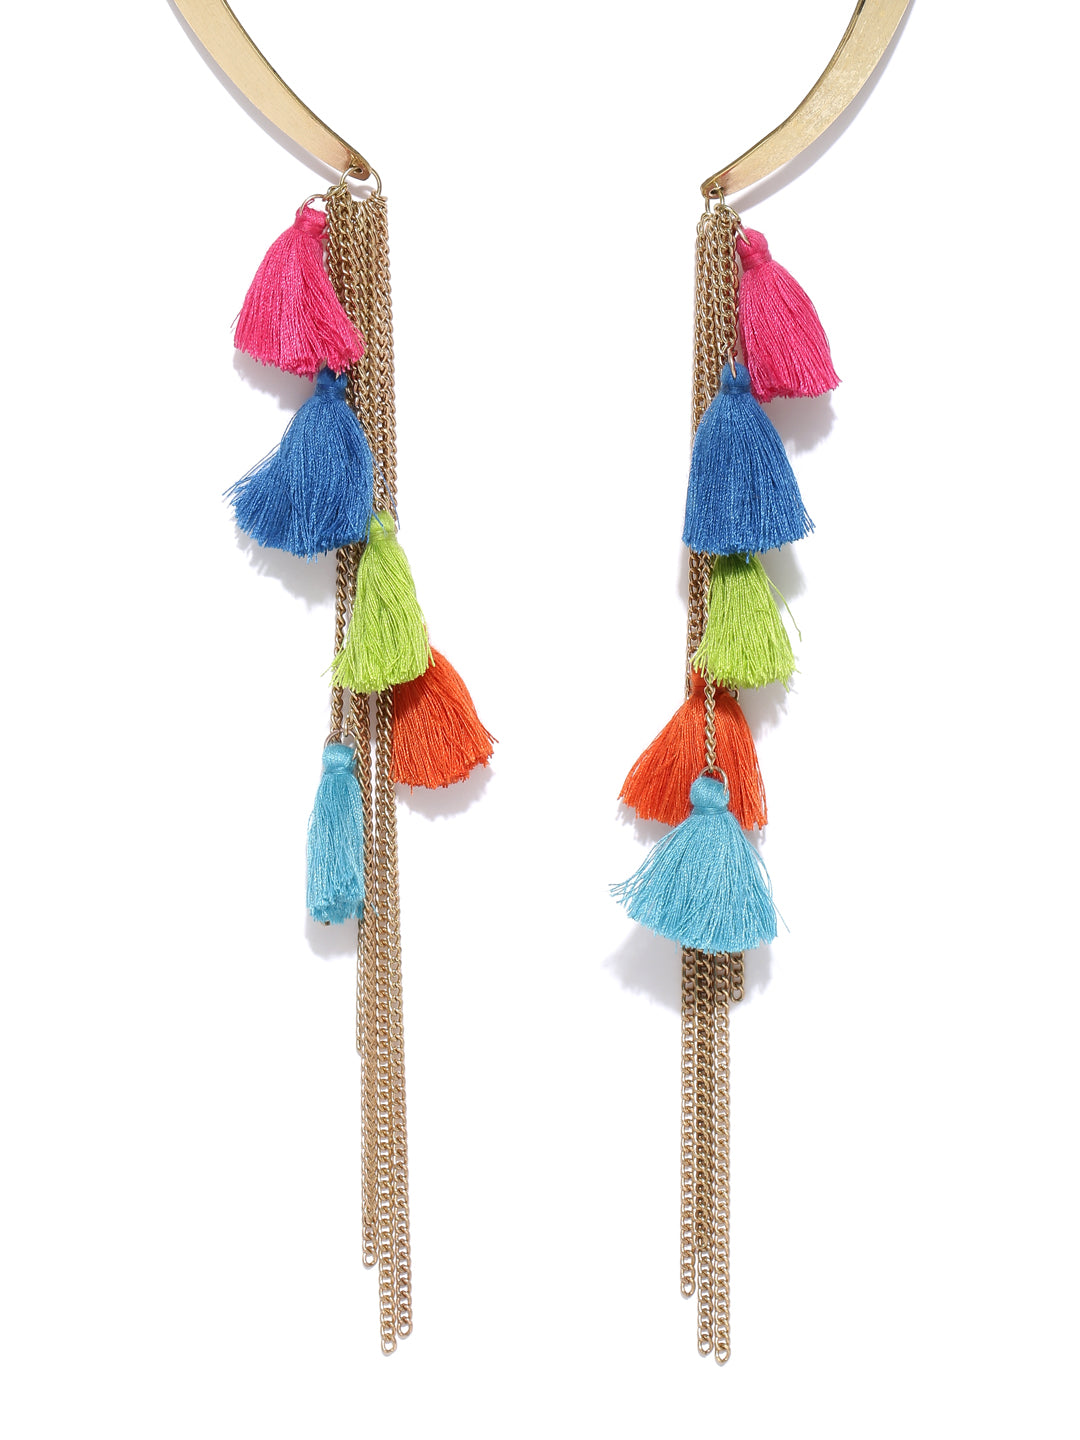 Gold toned hasli necklace with multicoloured tassel and chain danglers